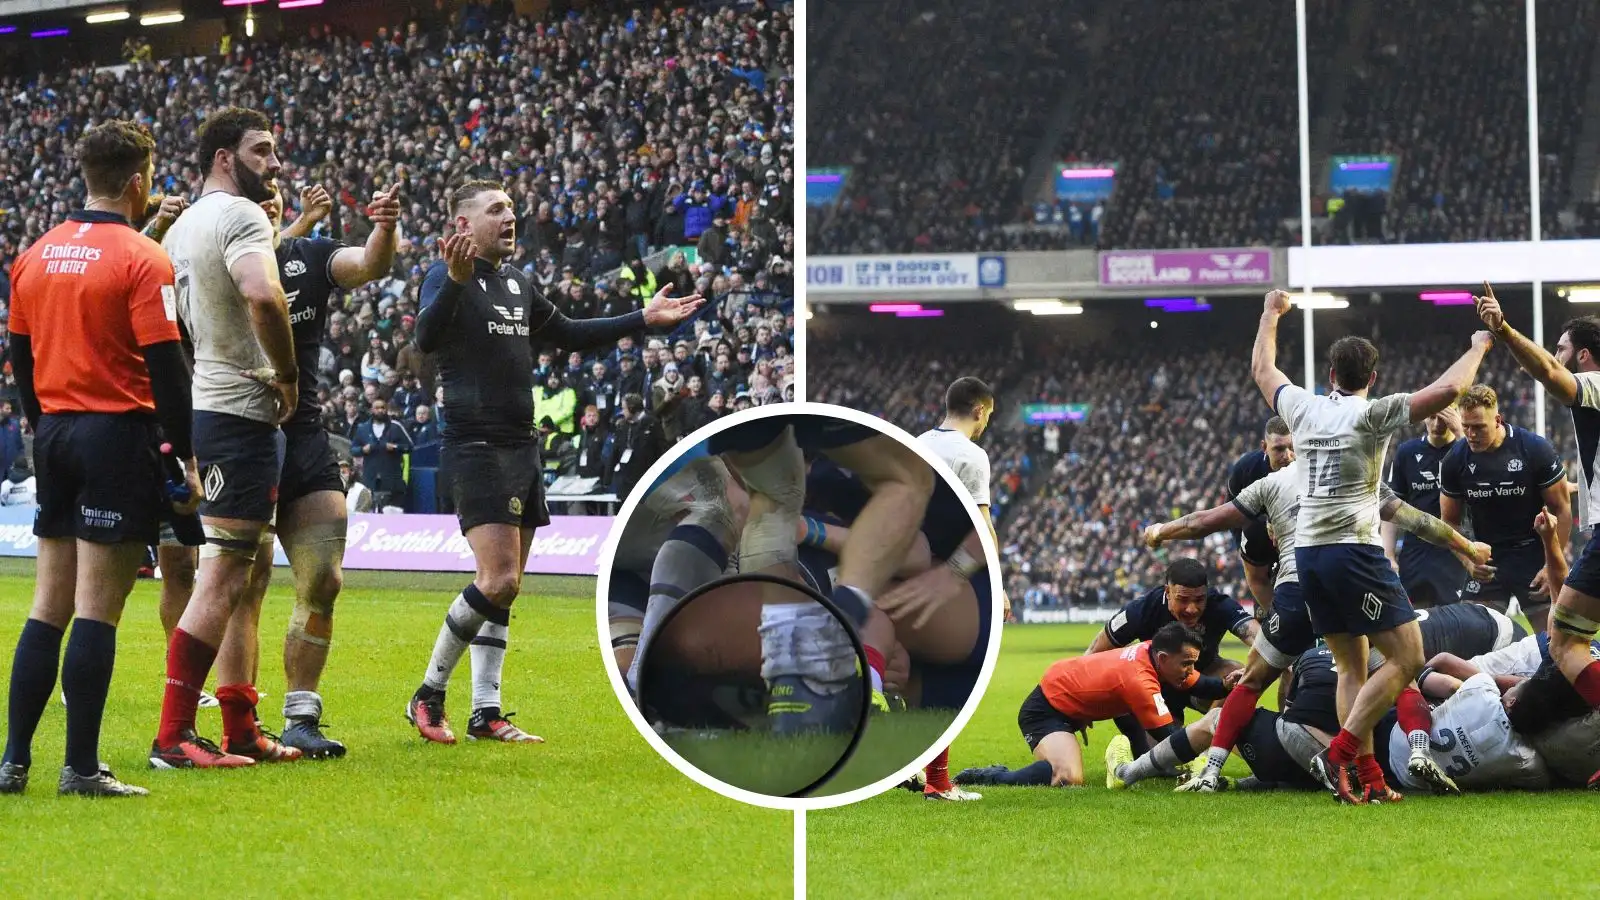 Split image of Finn Russell, referee Nic Berry checking the potential try, and screenshot during the 2024 Six Nations match between Scotland and France at Murrayfield.